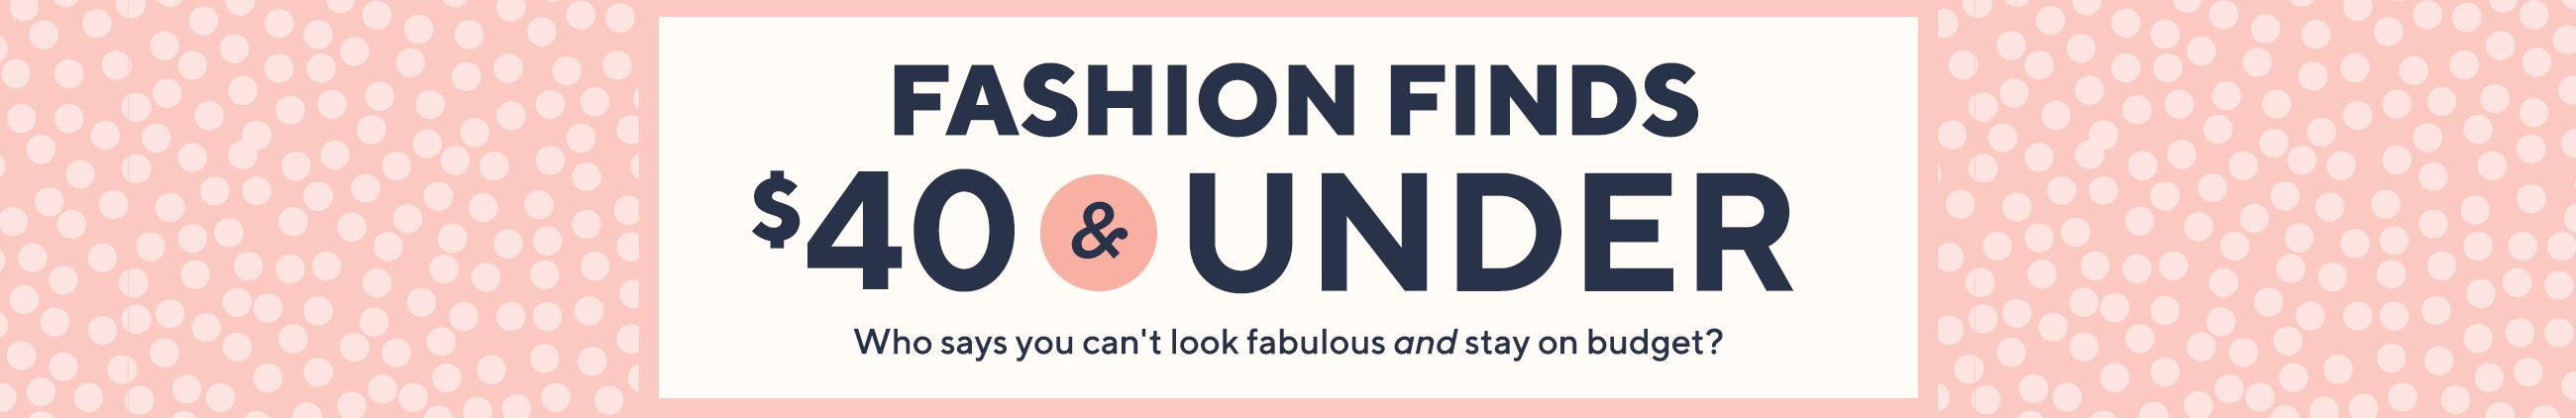 Fashion Finds $40 & Under.  Who says you can't look fabulous and stay on budget?